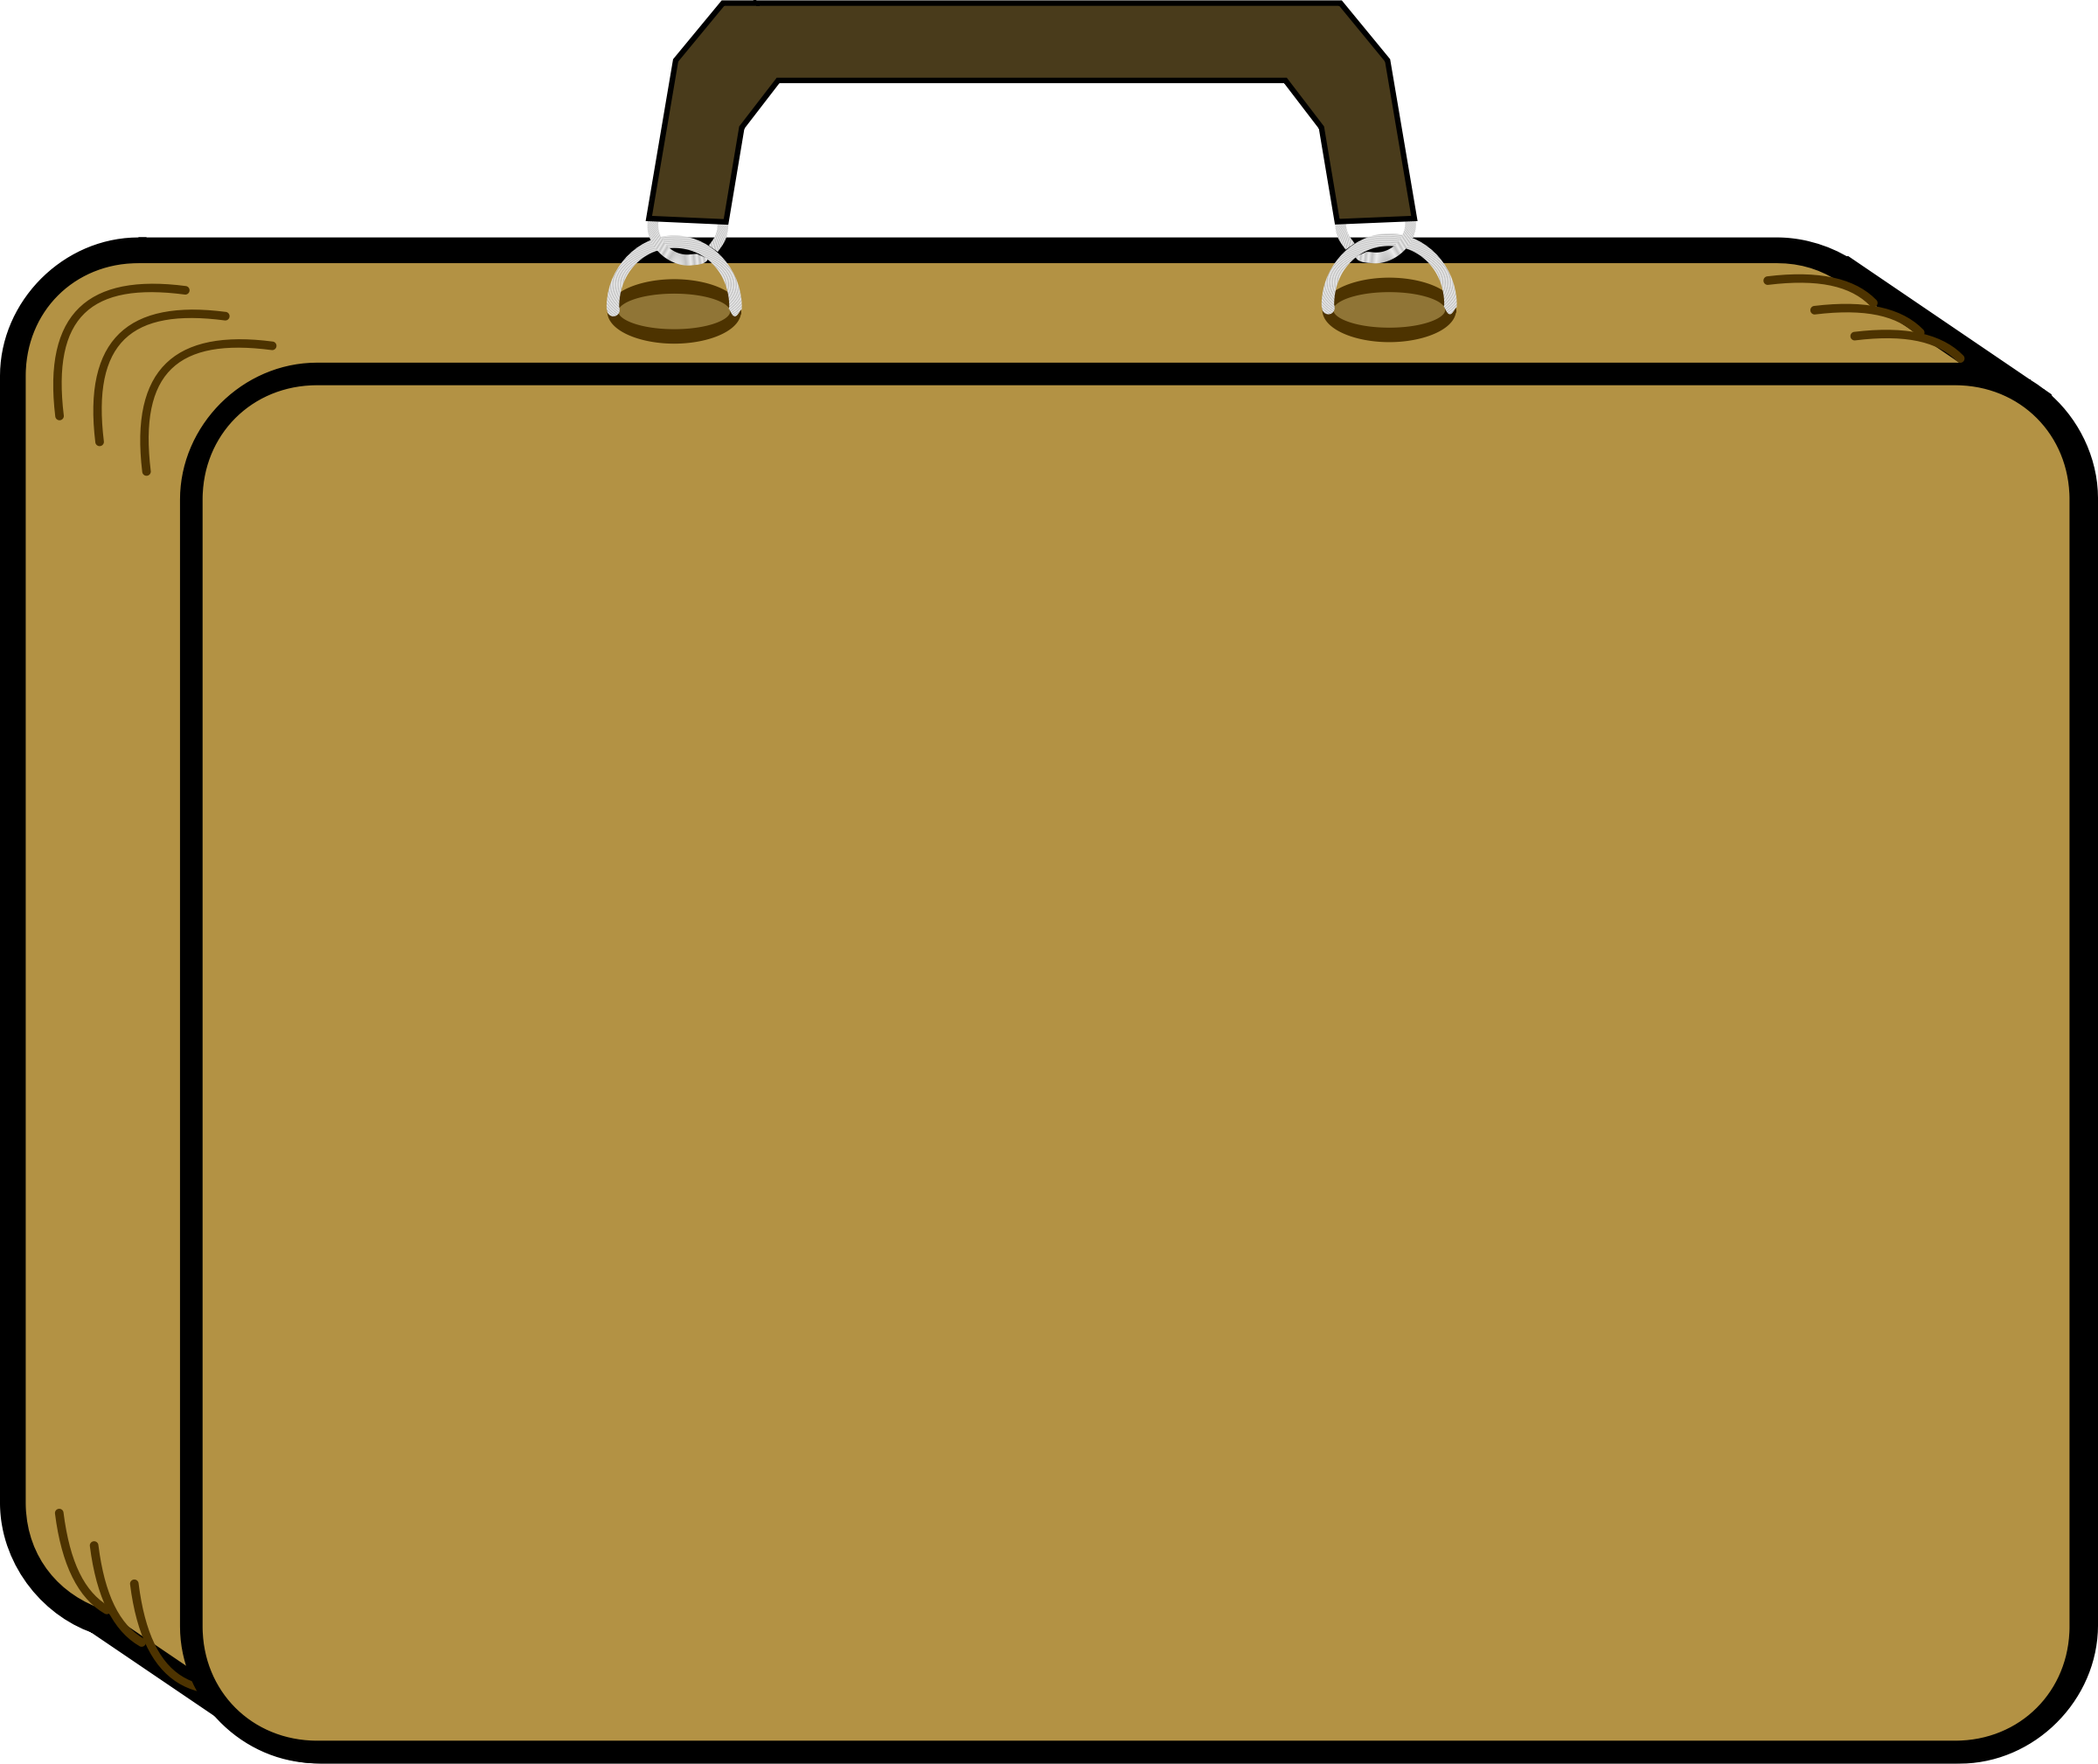 Suitcase Clipart Packing Vintage free image